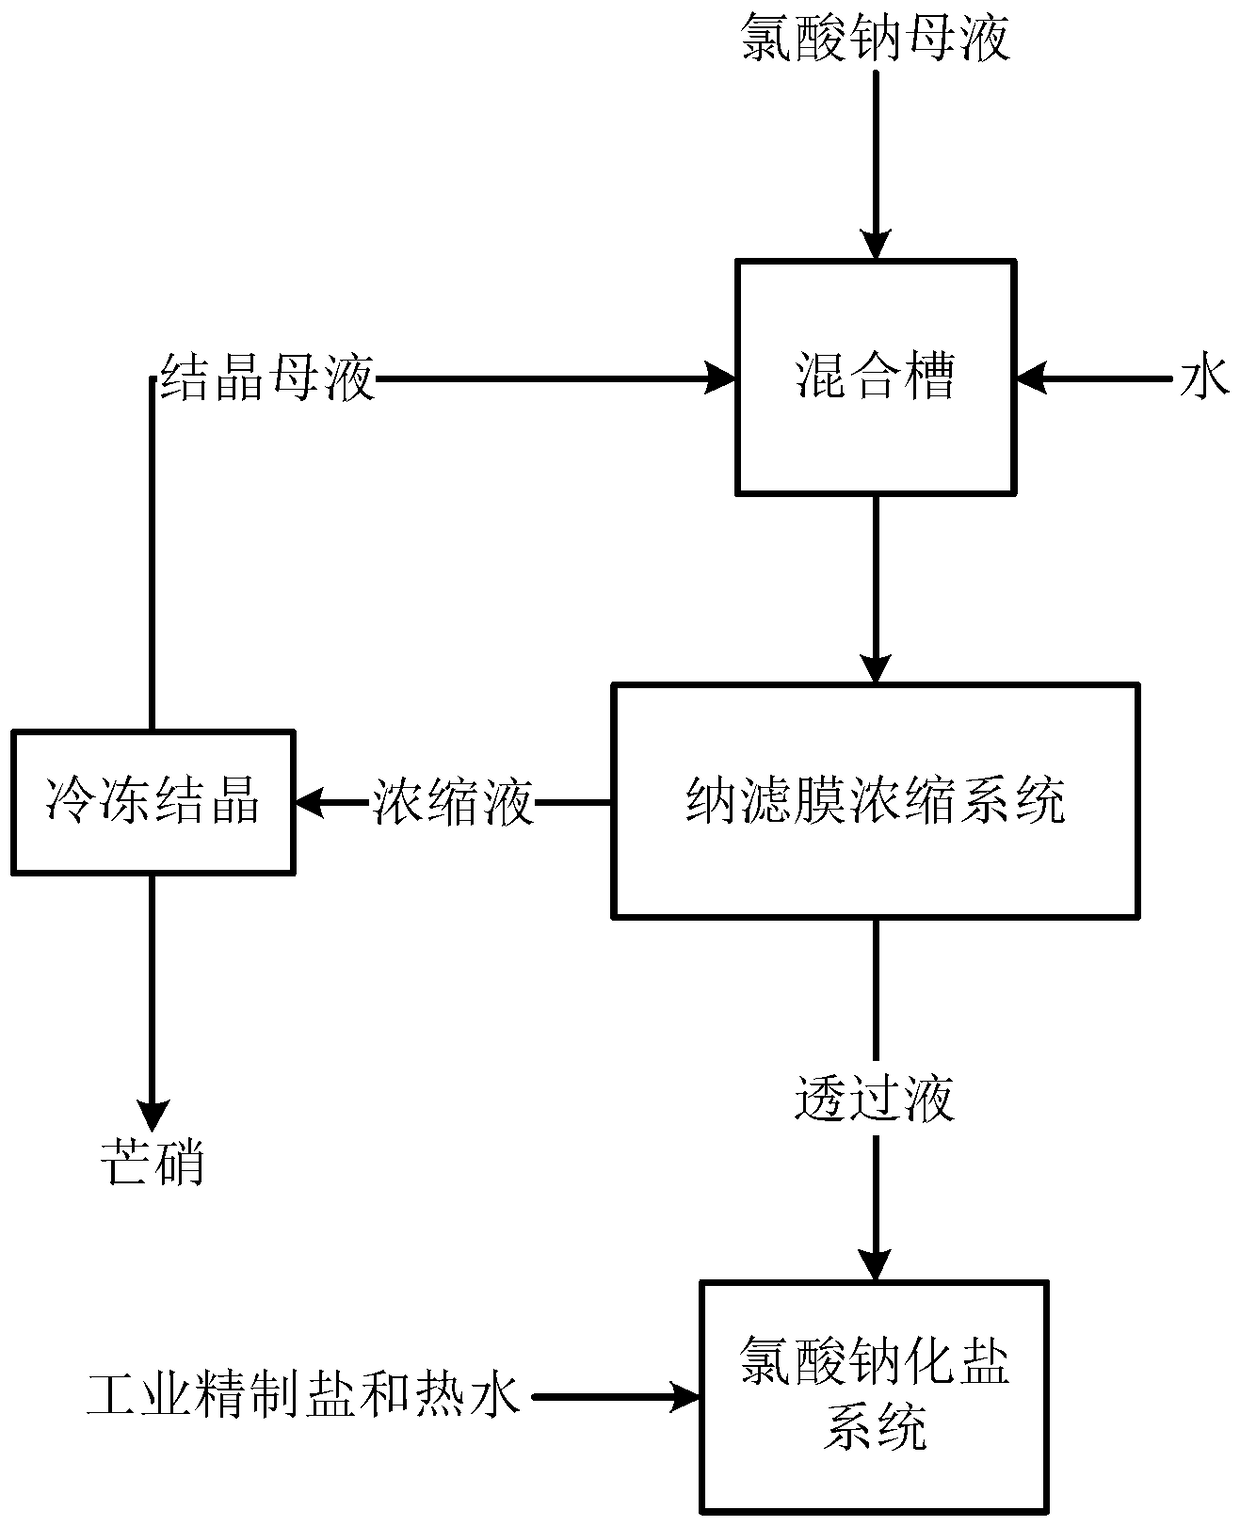 Process for freezing and denitrating sodium chlorate mother liquor by aid of membrane methods